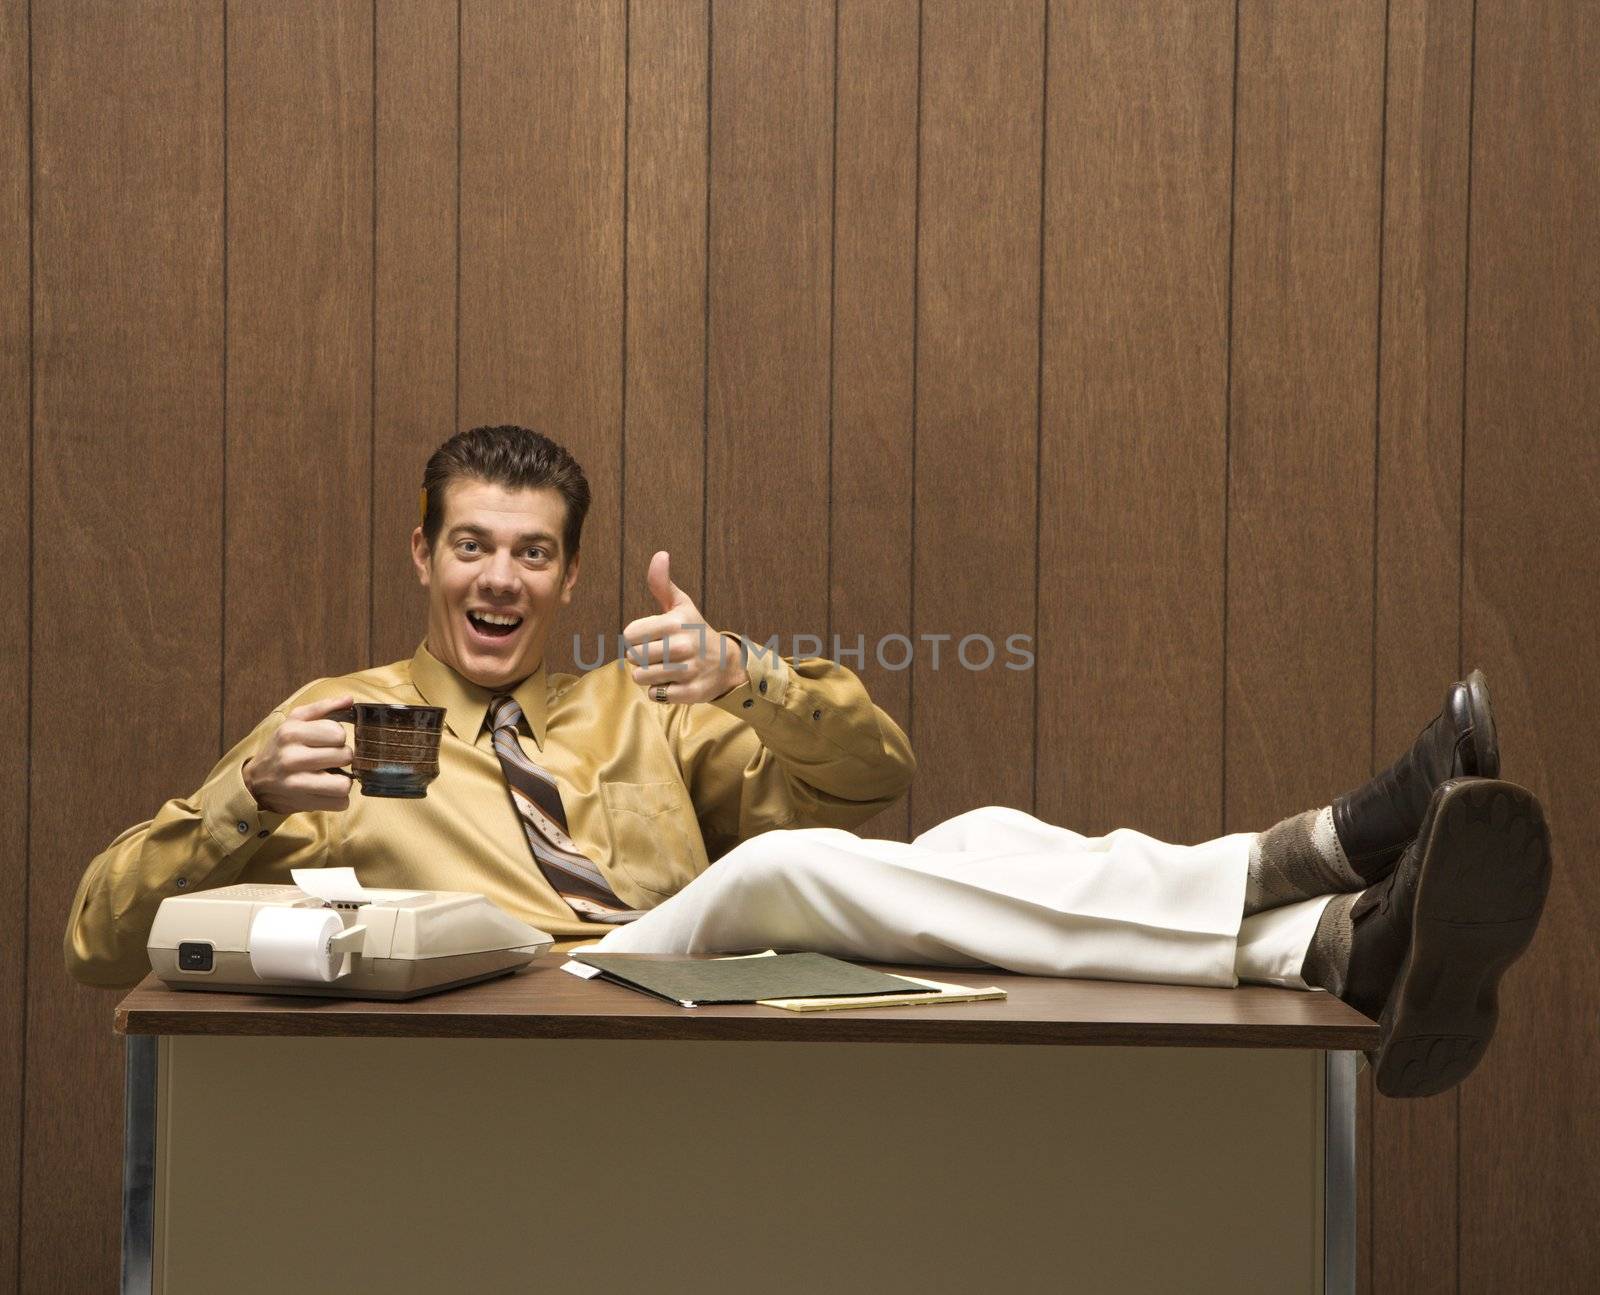 Caucasion mid-adult retro businessman sitting with feet propped on desk drinking coffee giving a thumbs up.